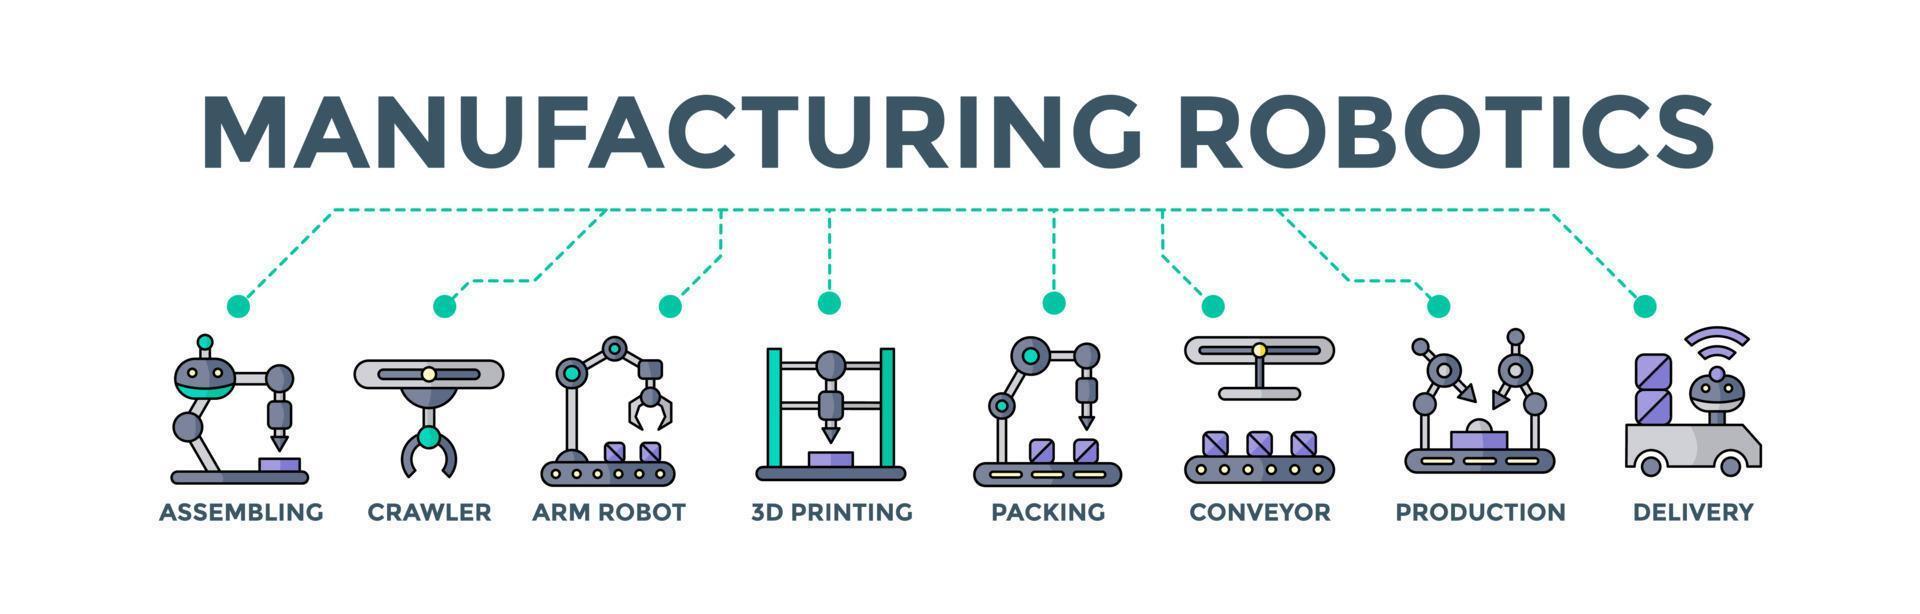 Manufacturing robotics banner web icon vector illustration concept for industrial automation with an icon of assembling, crawler, arm robot, 3d printing, packing conveyor belt, production and delivery